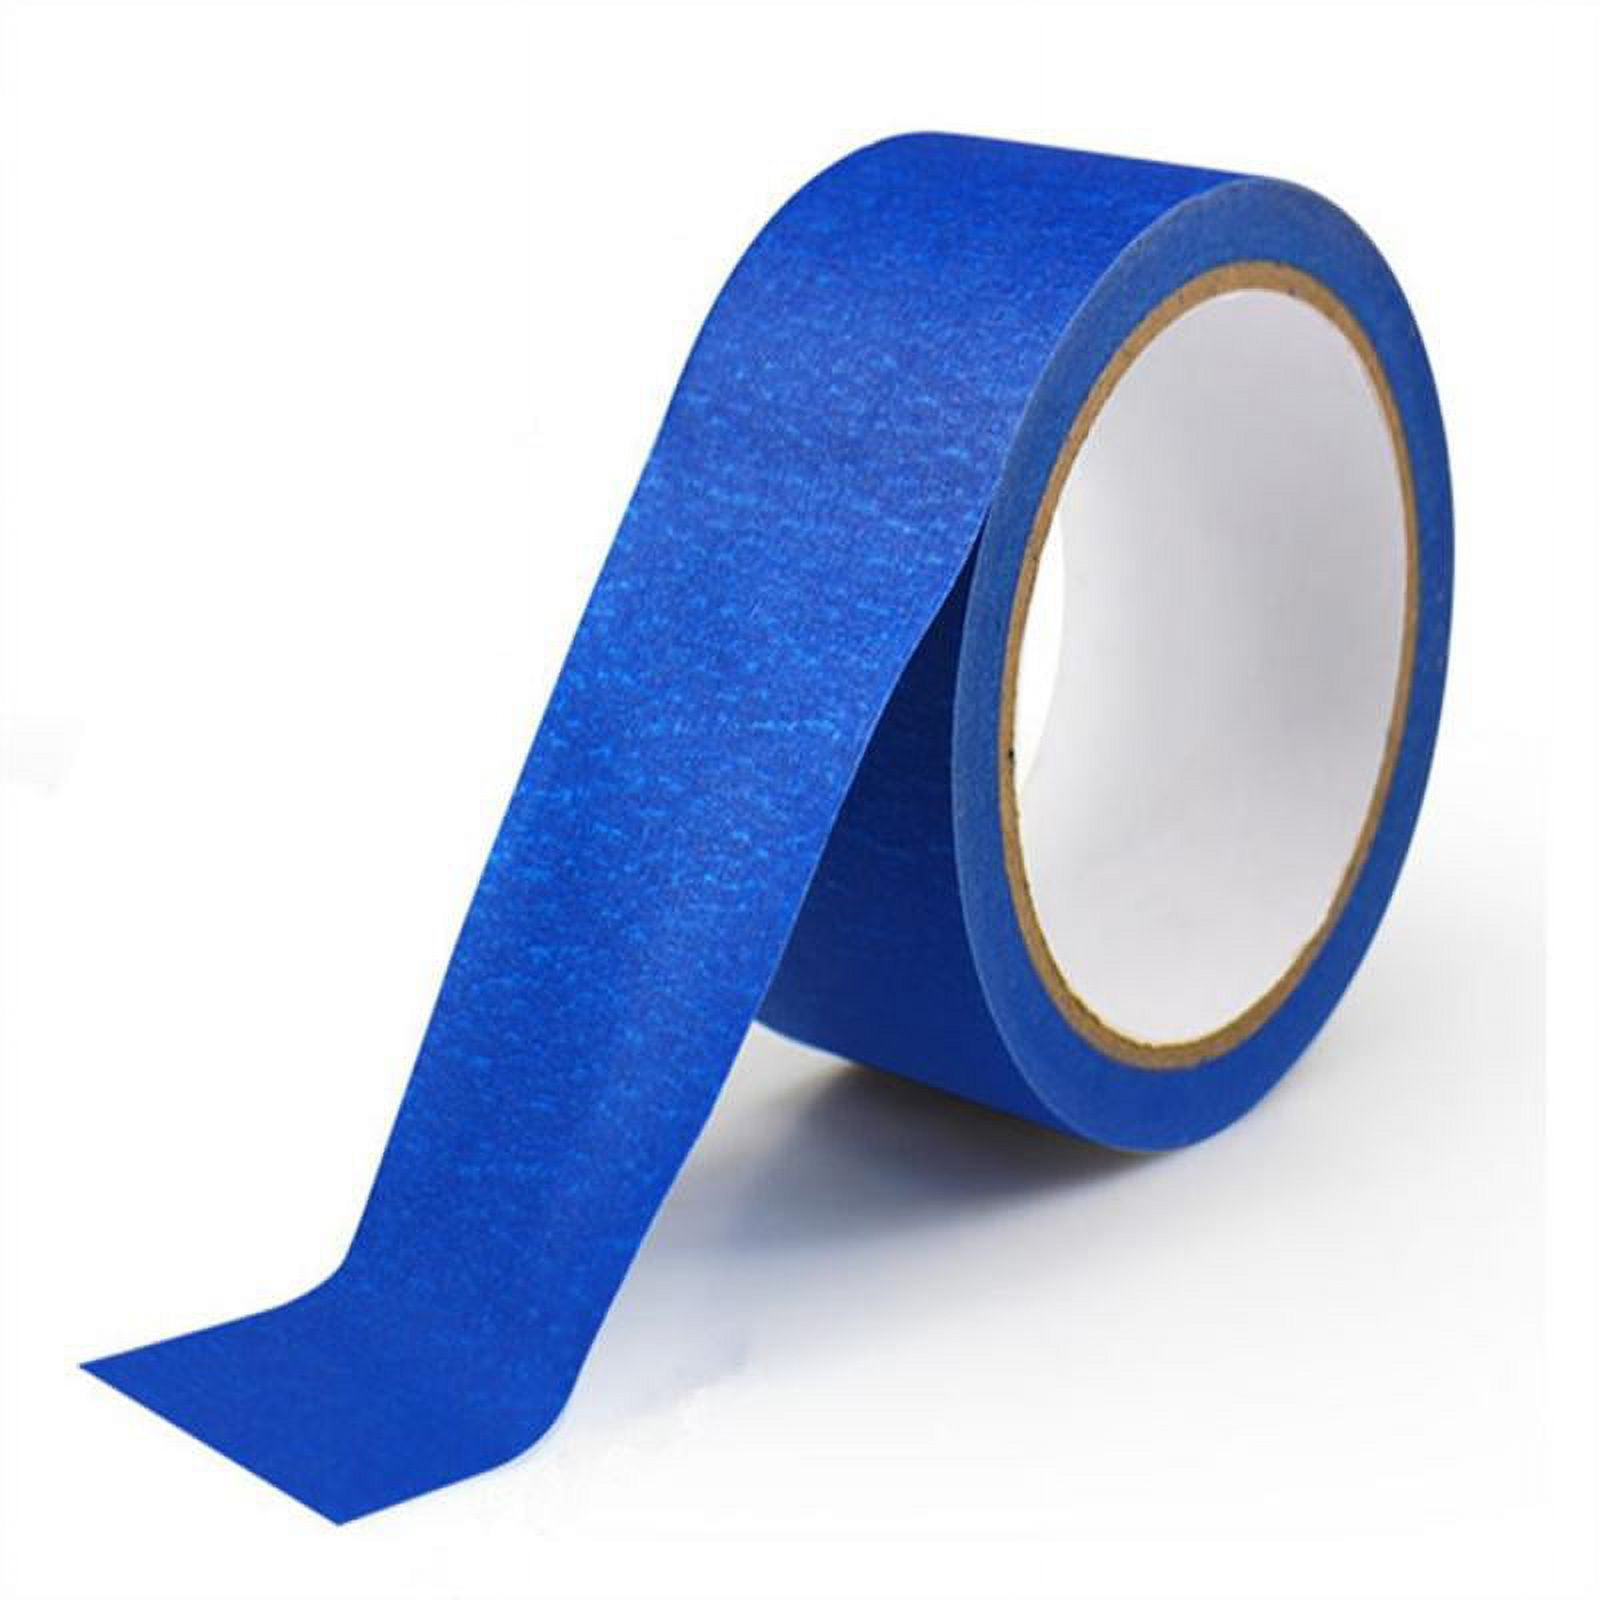 EXCEART 6pcs Basics Masking Tape Drop Cloth Tape Crafts Tape Wall Painting  Tape Masking Paper Tape Gaffers Tape Adhesive Painting Tape Trim Finishing